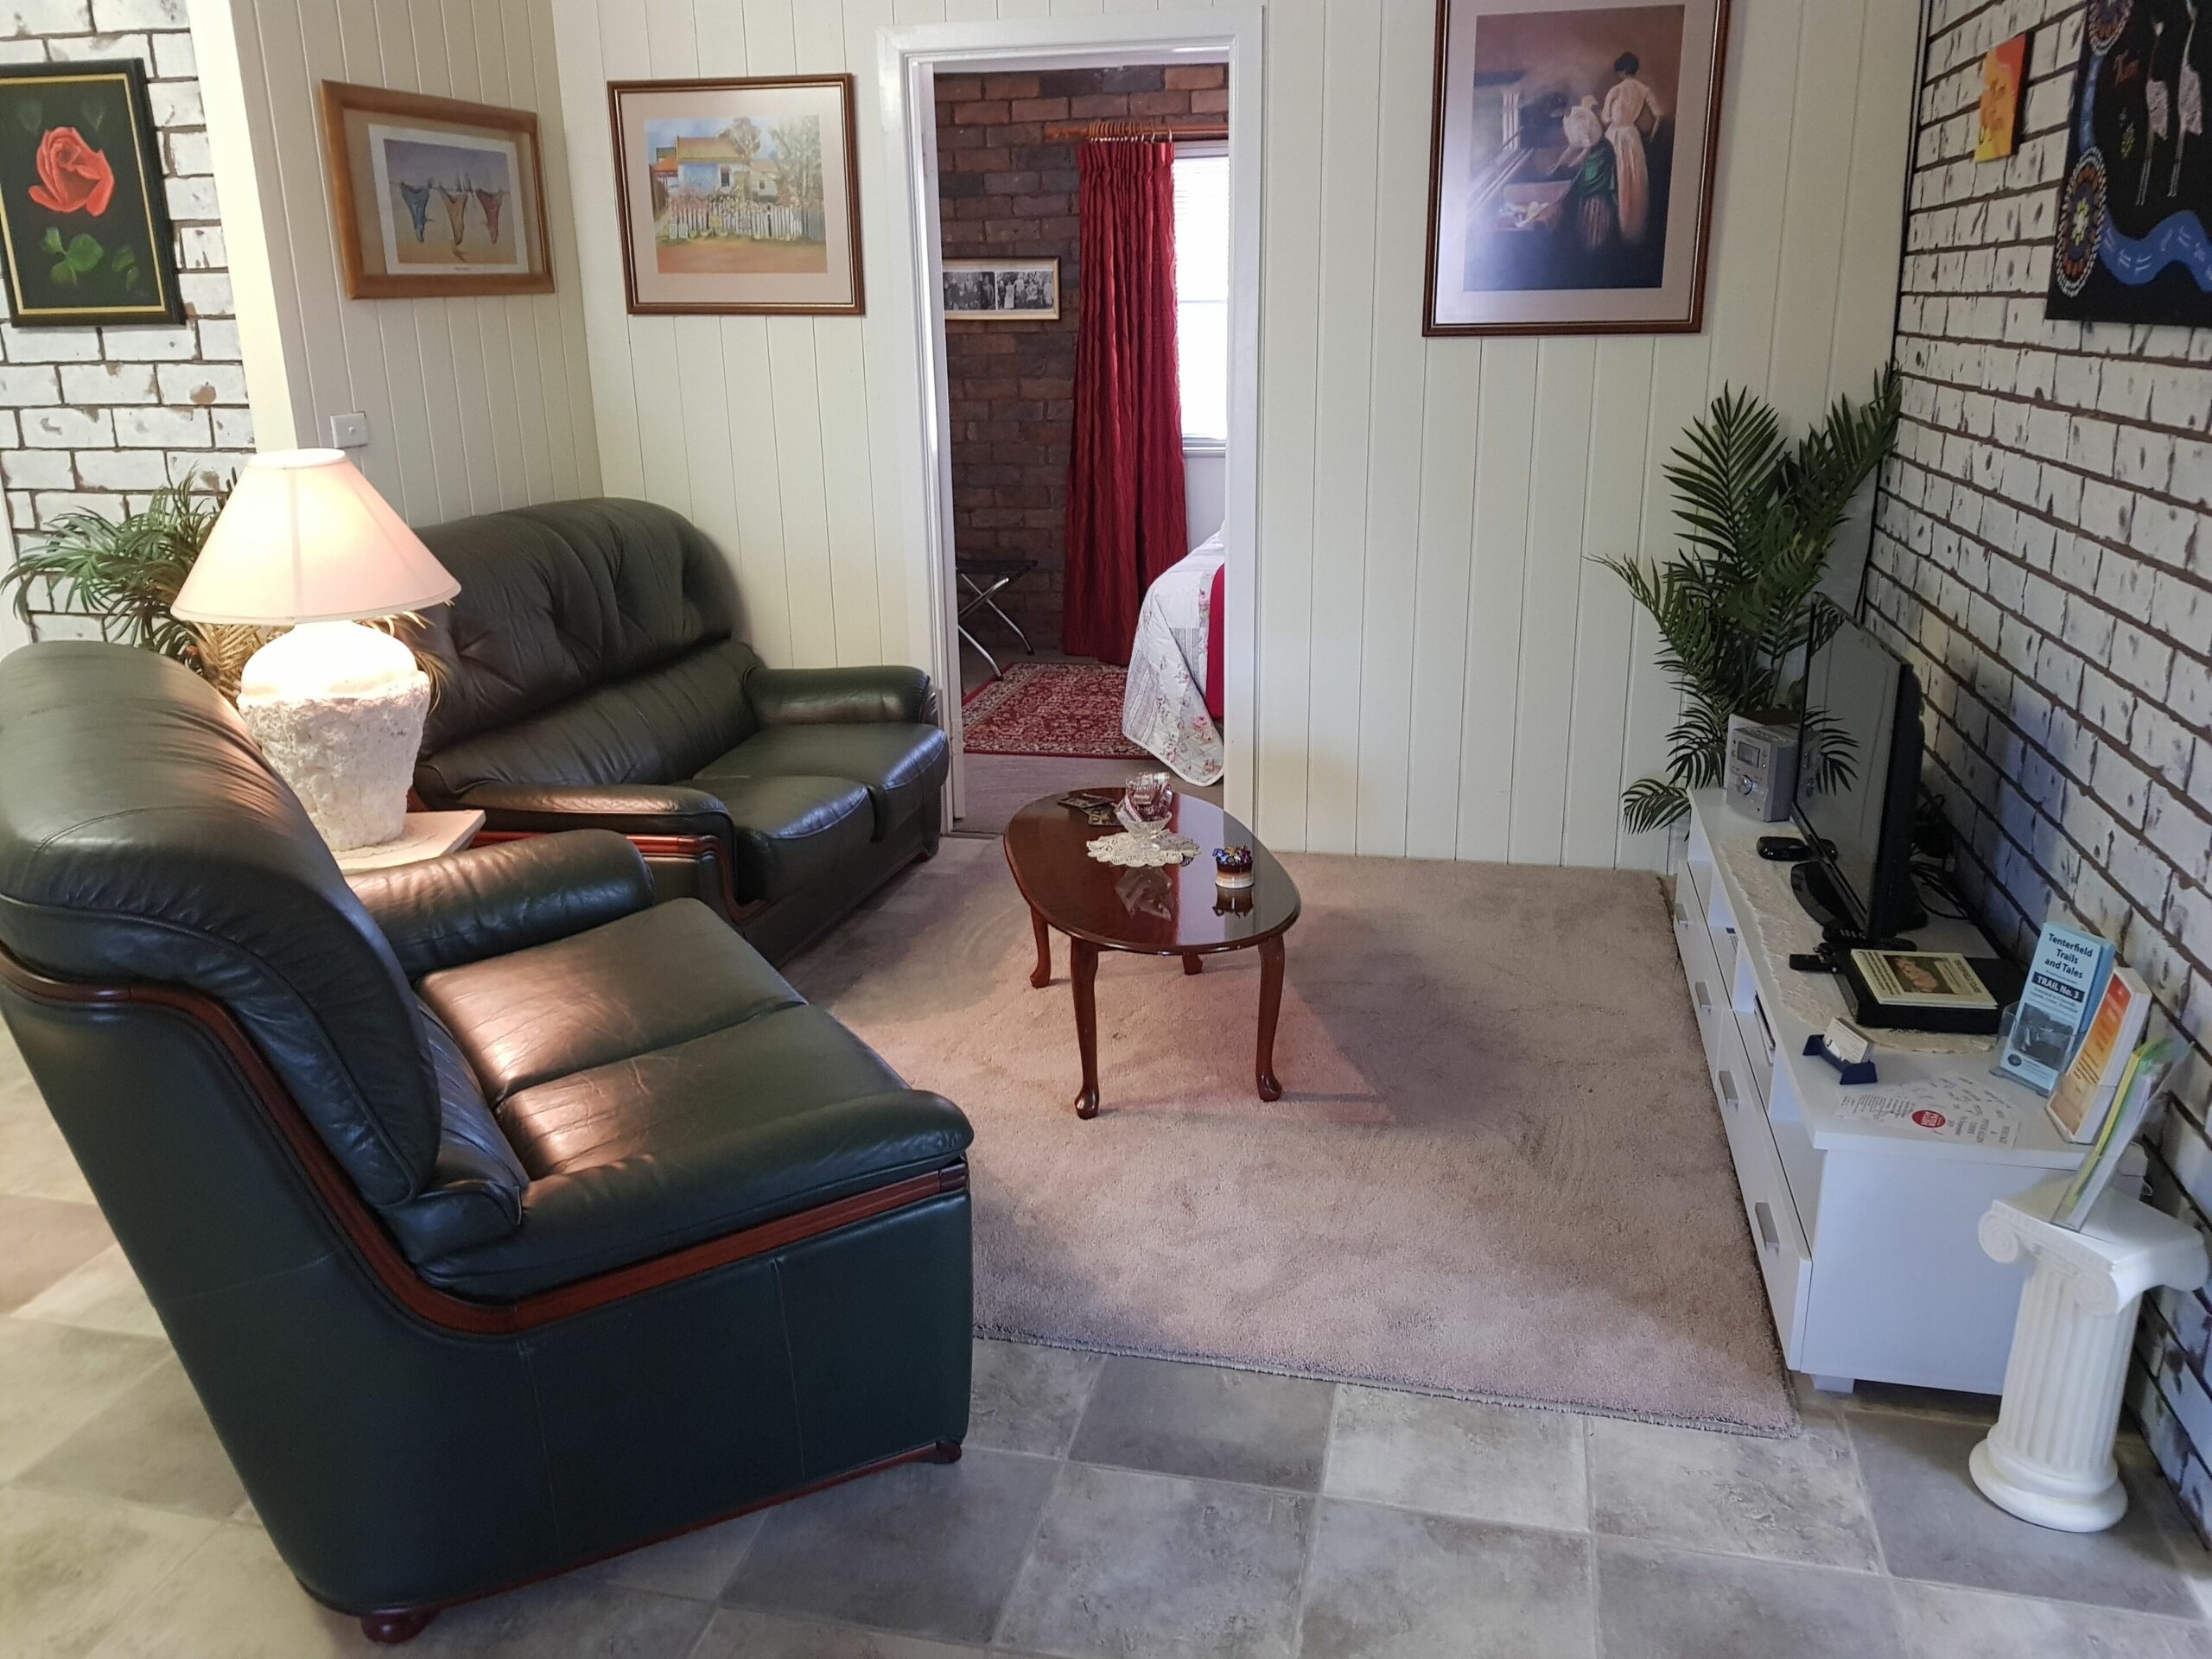 "classic Country Charm" in a Quite Location.free Wifi & Netflix. Relax & Unwind